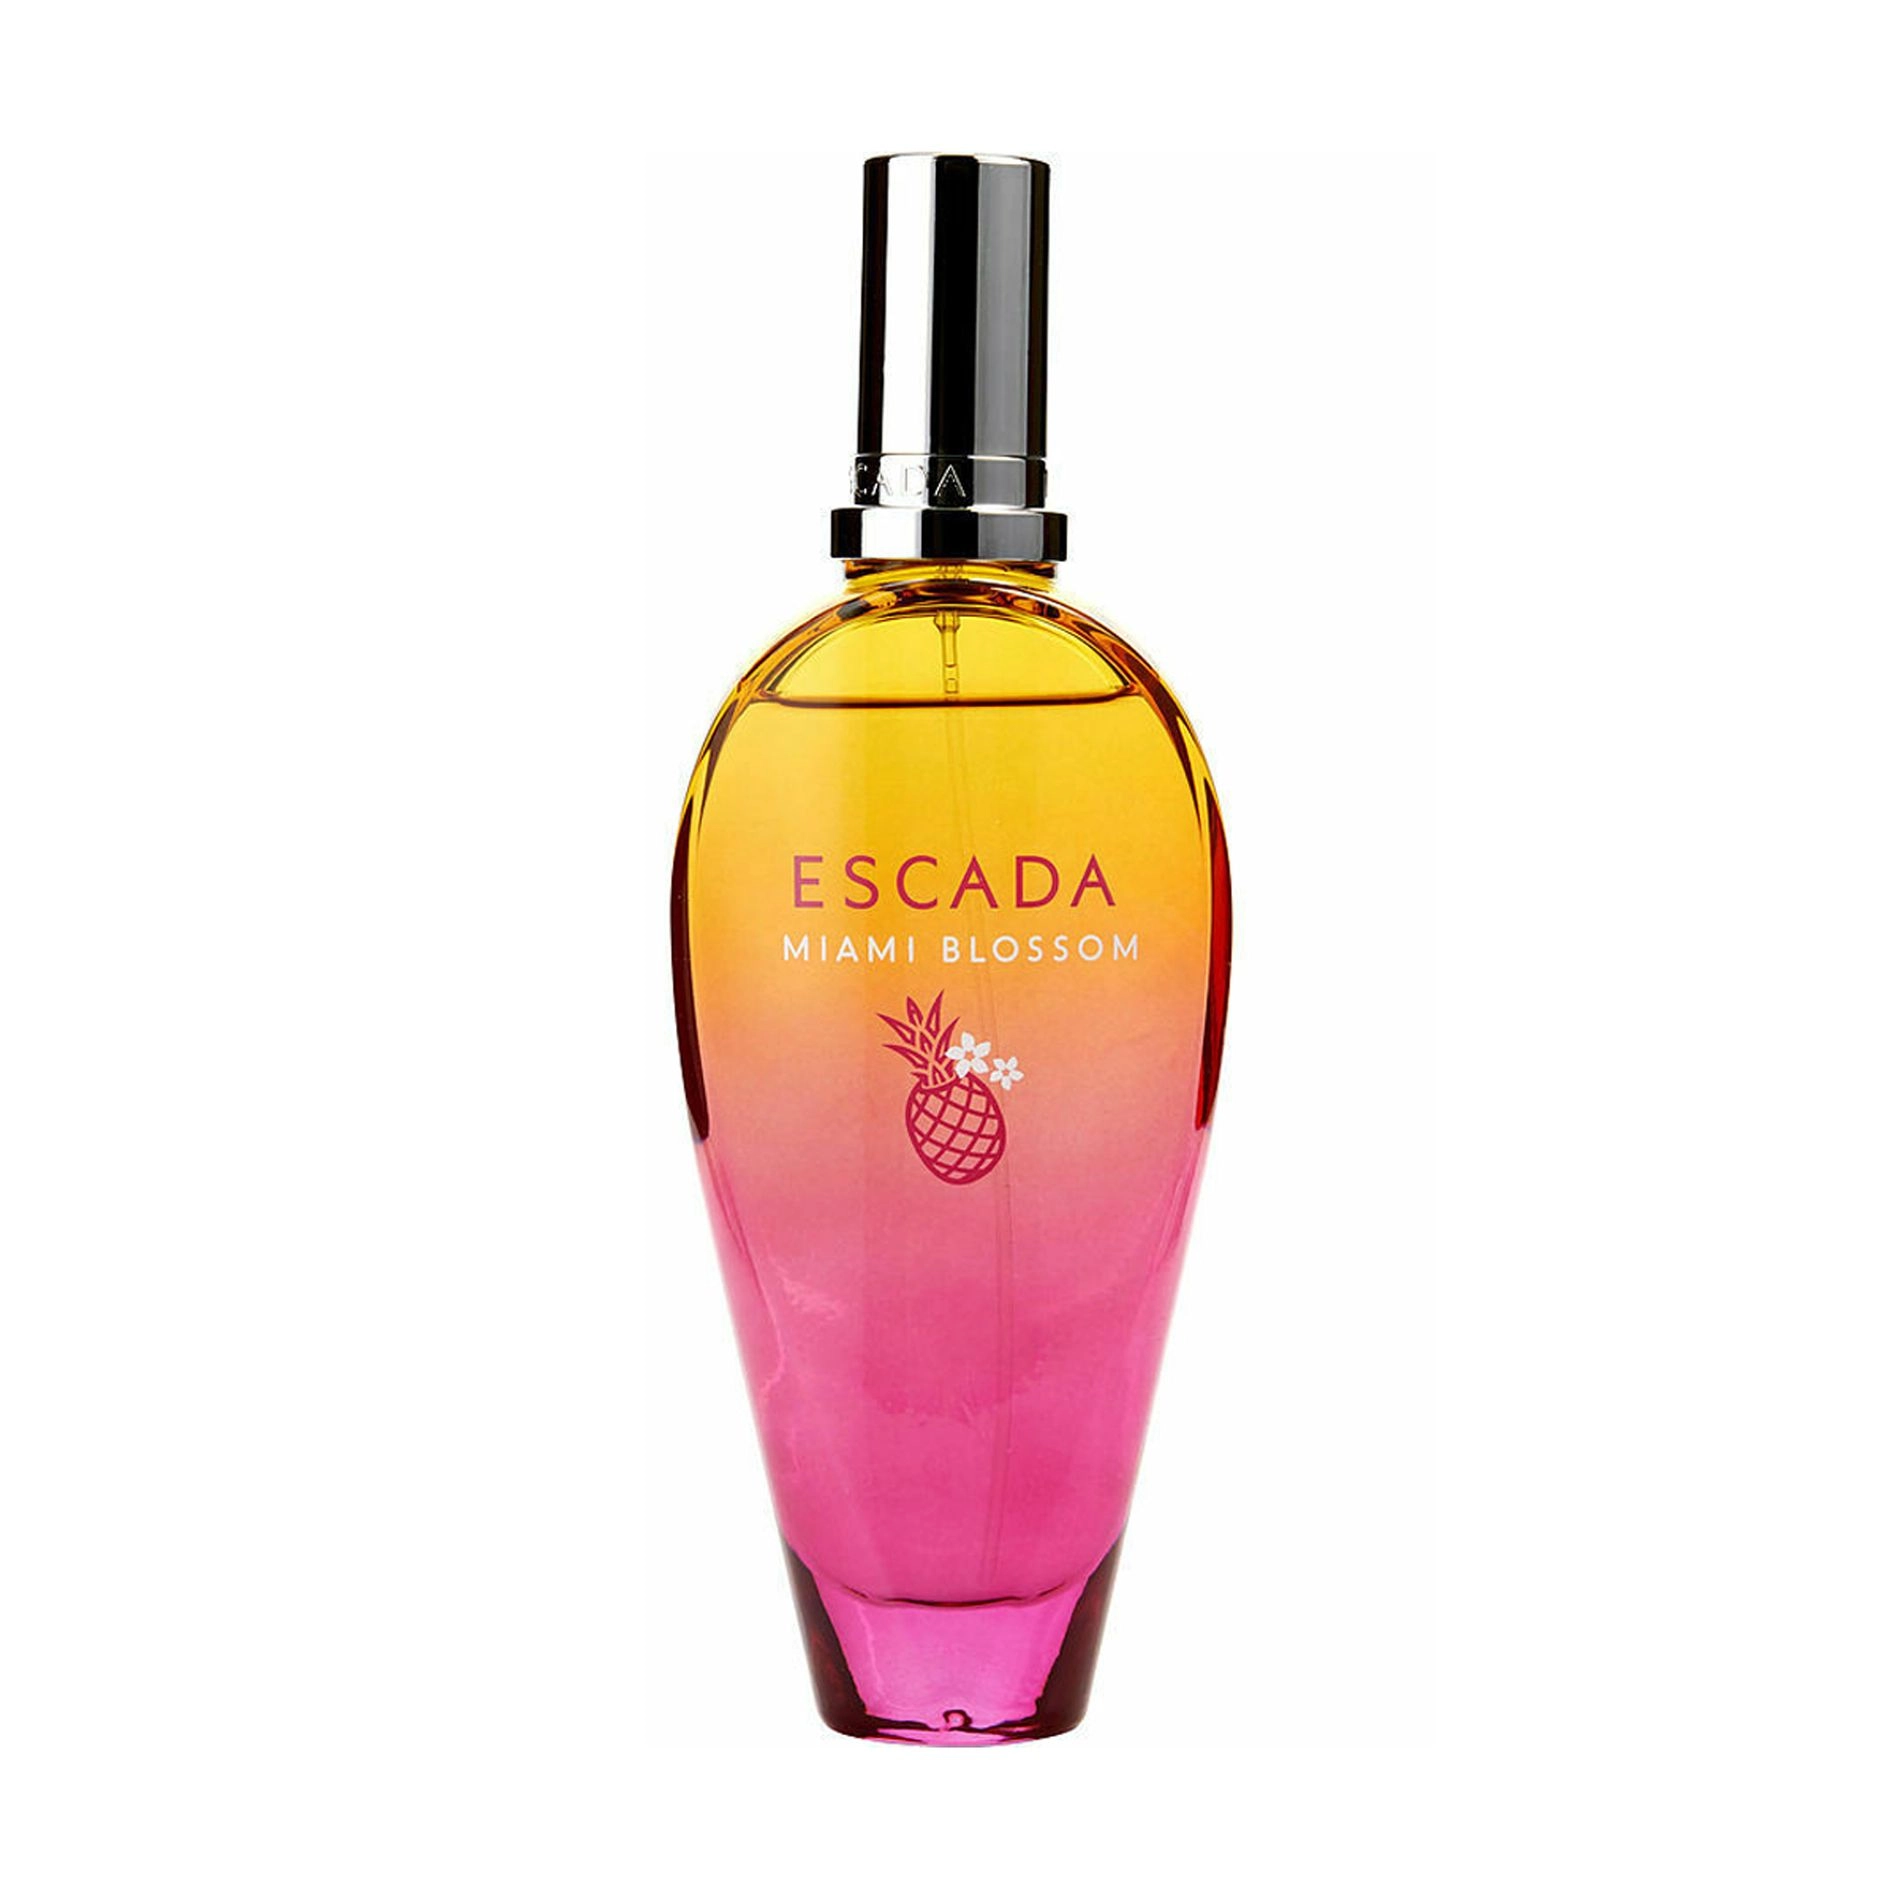 Miami blossom. Escada Miami Blossom 100 ml. Escada Miami Blossom EDT woman 100ml Tester. Парфюм Escada Miami Blossom 100 мл. Духи Escada Miami Blossom Limited Edition EDP, 100 ml.